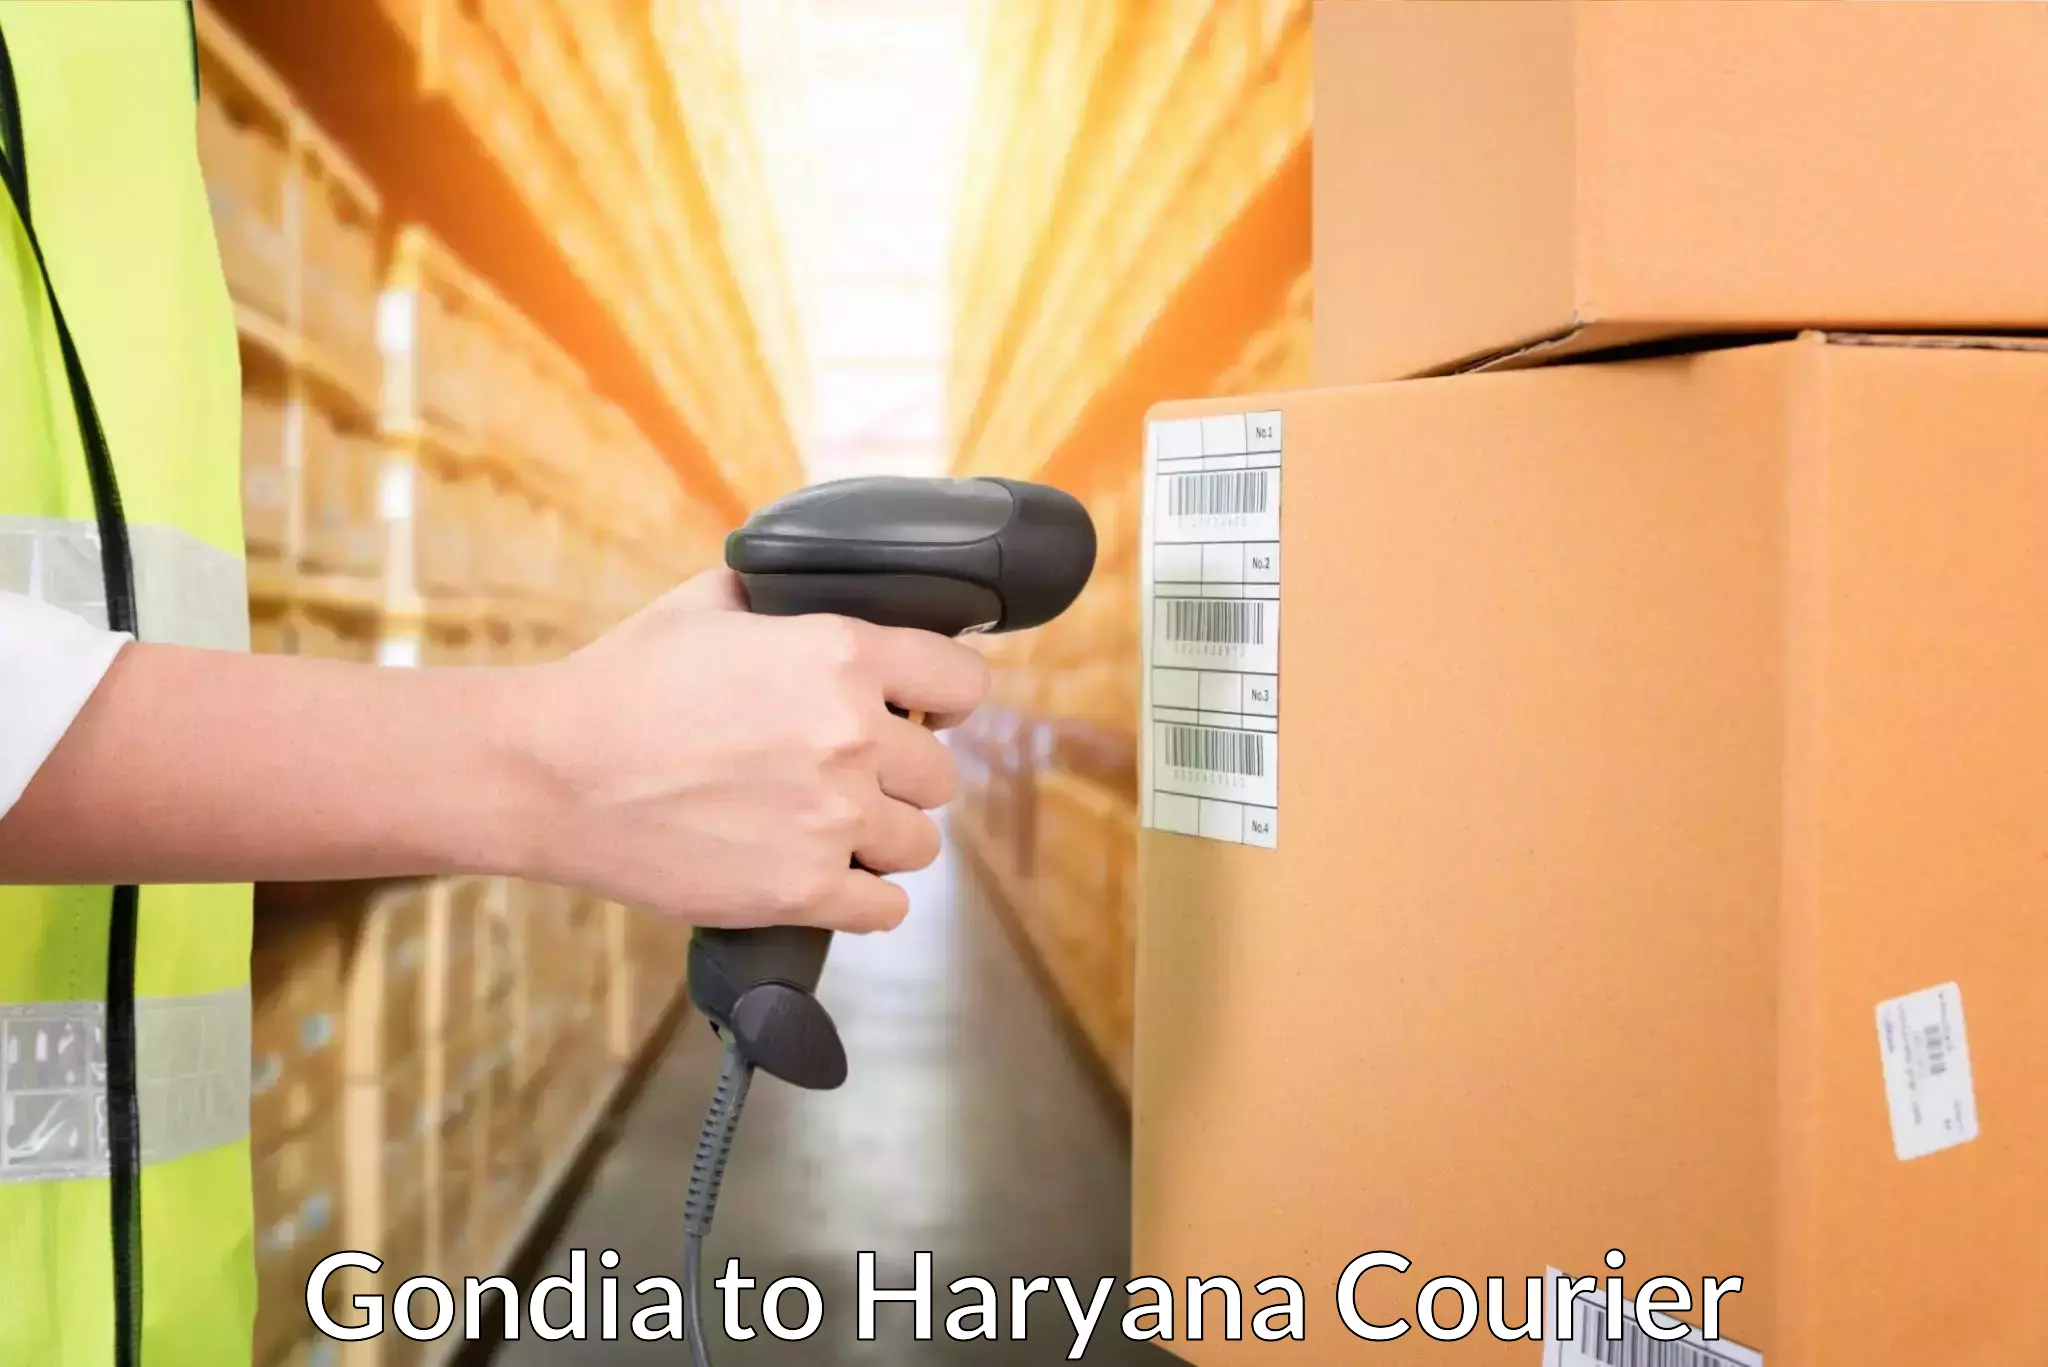 Quality courier partnerships Gondia to Chaudhary Charan Singh Haryana Agricultural University Hisar